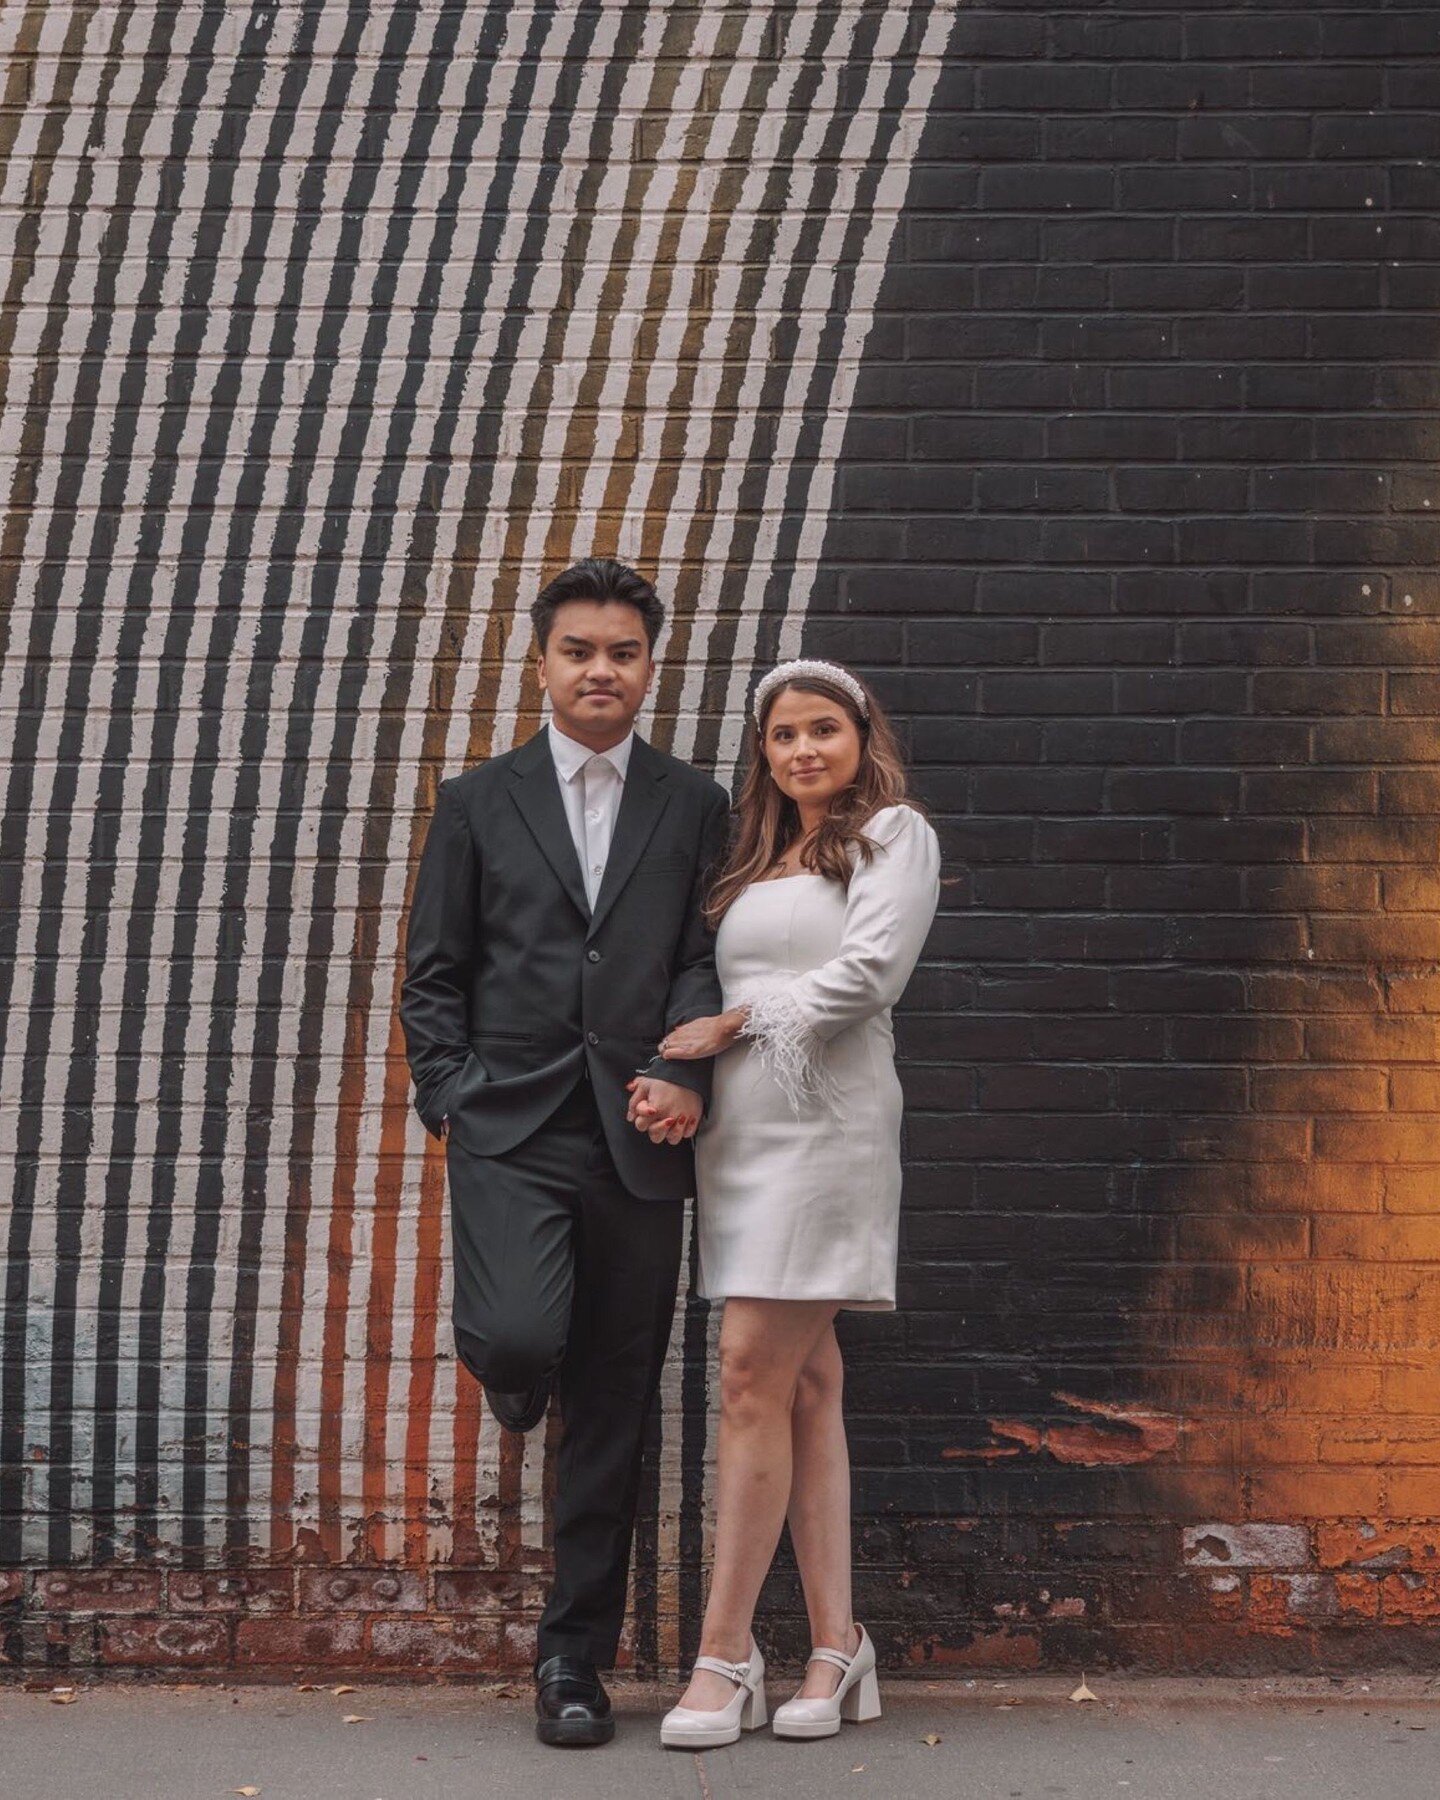 Looking fly in Dumbo is the law. Congrats to Janmark &amp; Carly! 💃🕺✨